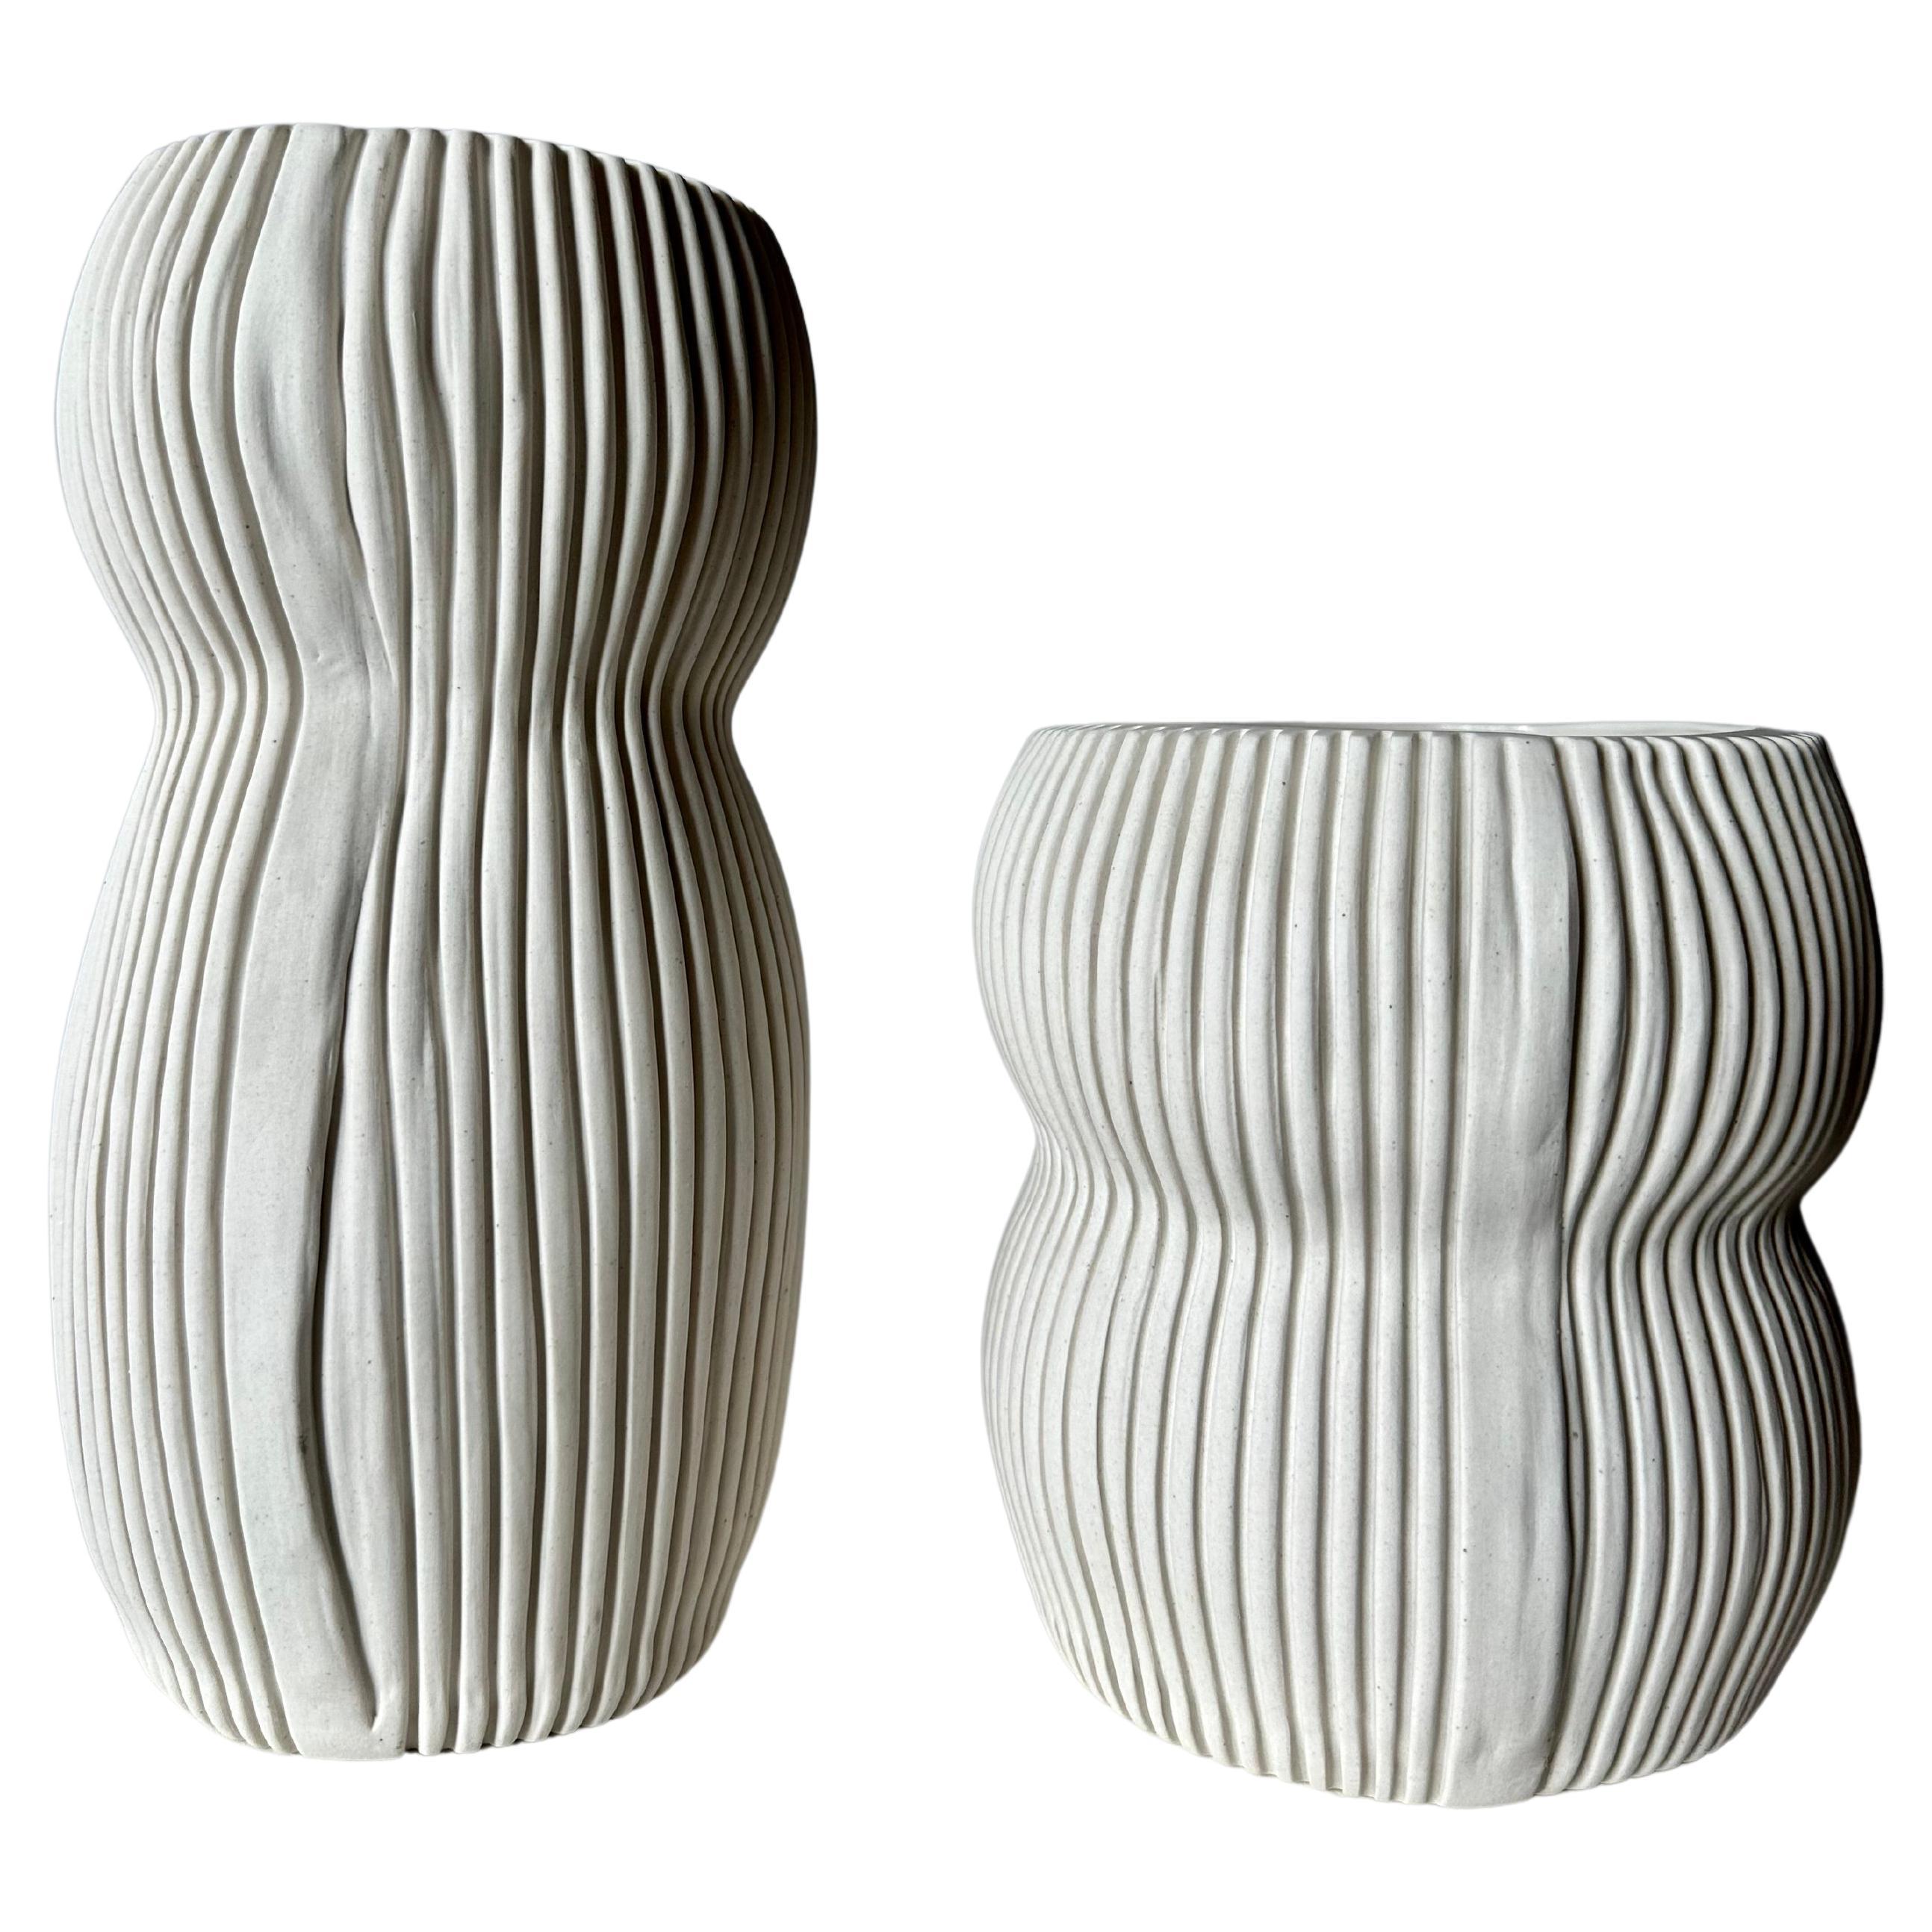 Pair of Curvy Textured White Porcelain Vases, by Cym Warkov